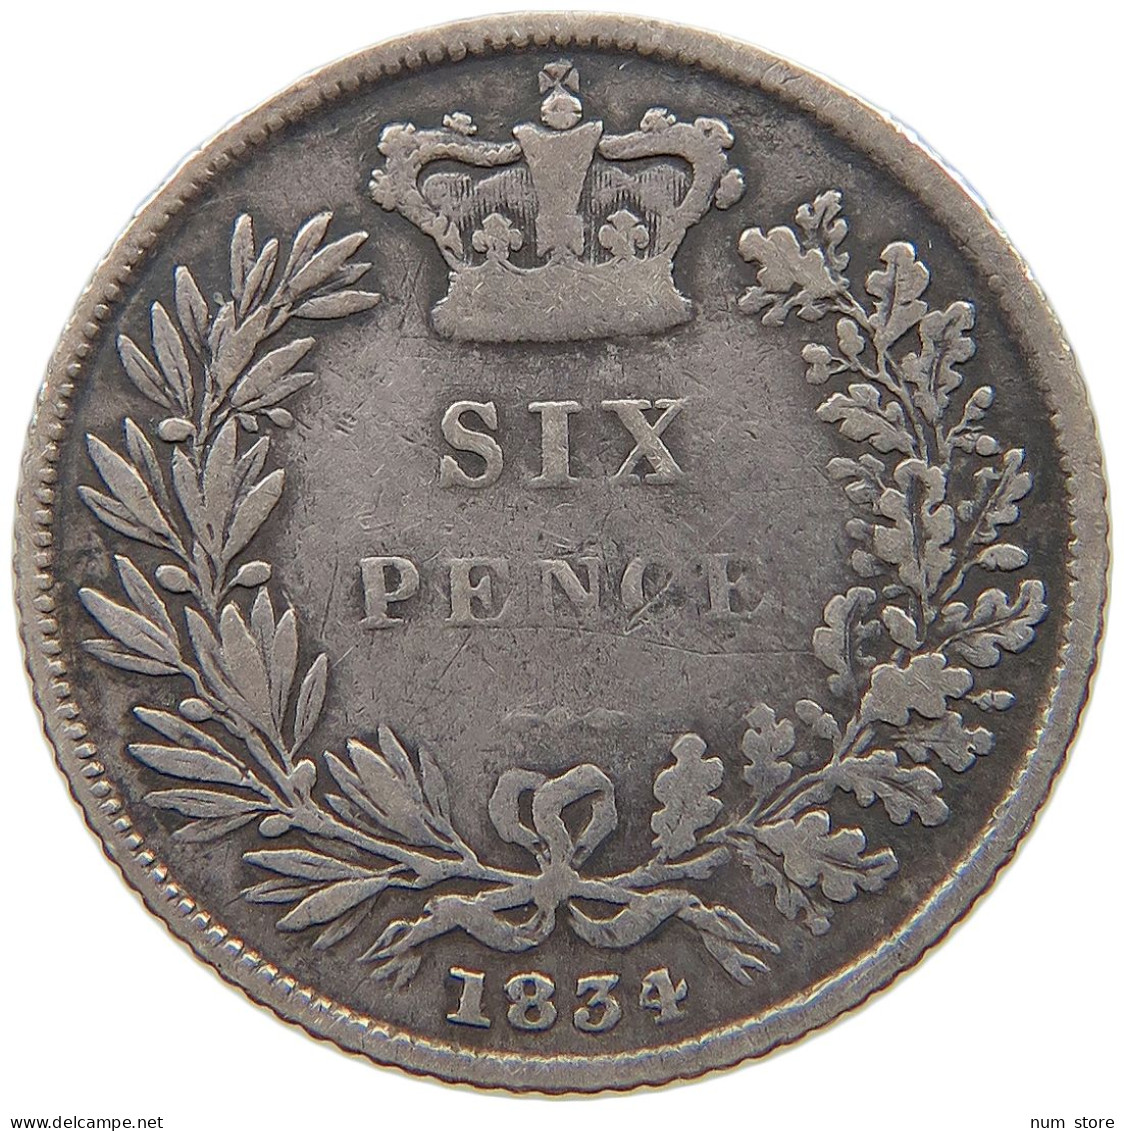 GREAT BRITAIN SIXPENCE 1834 WILLIAM IV. (1830-1837) #t112 0239 - H. 6 Pence